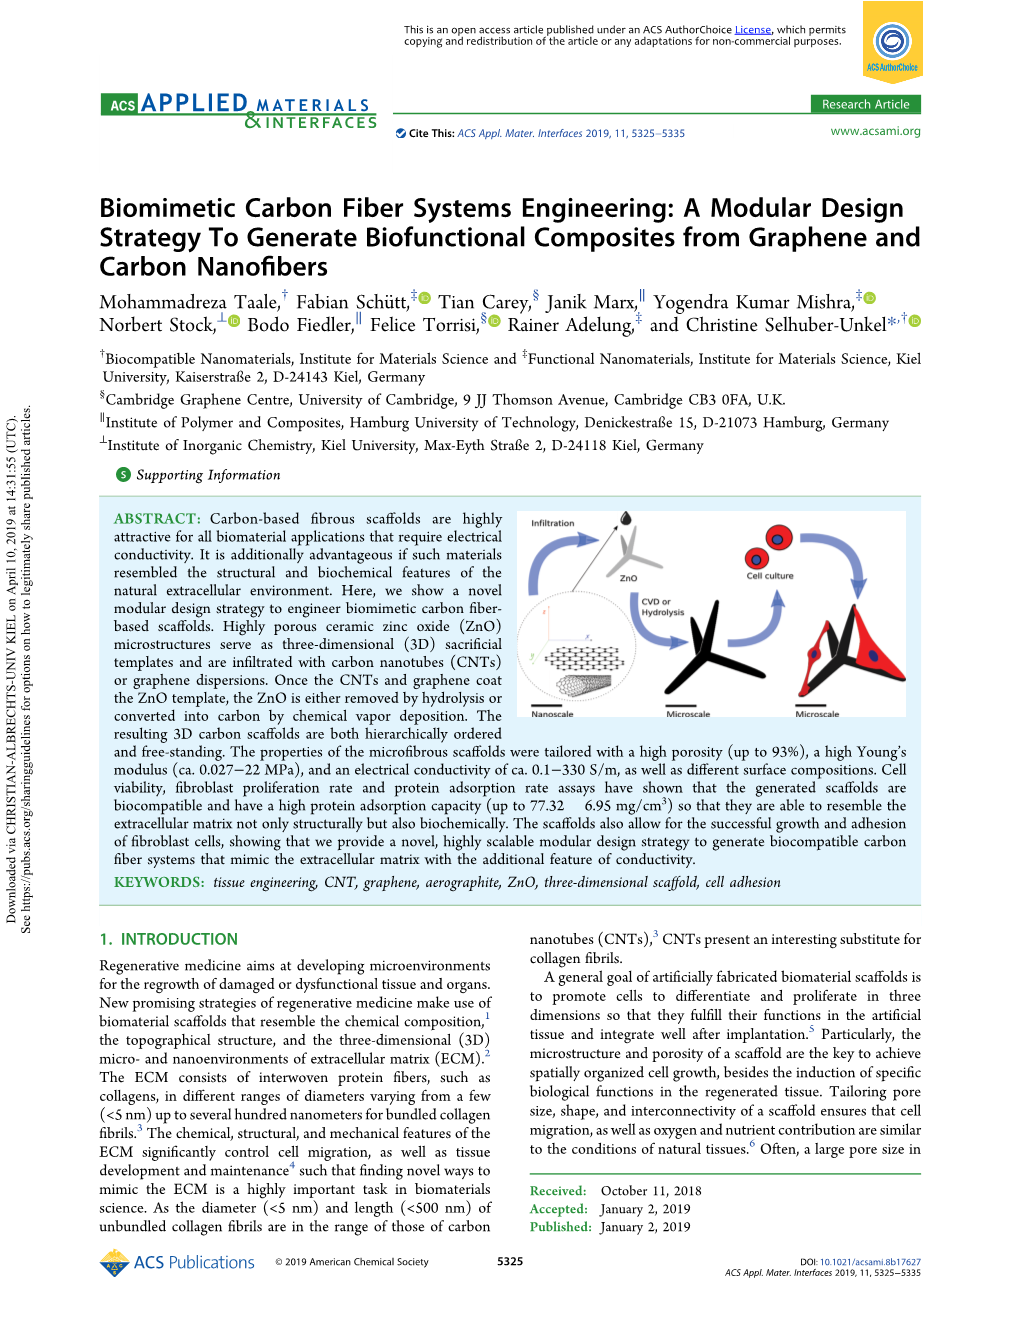 Biomimetic Carbon Fiber Systems Engineering: a Modular